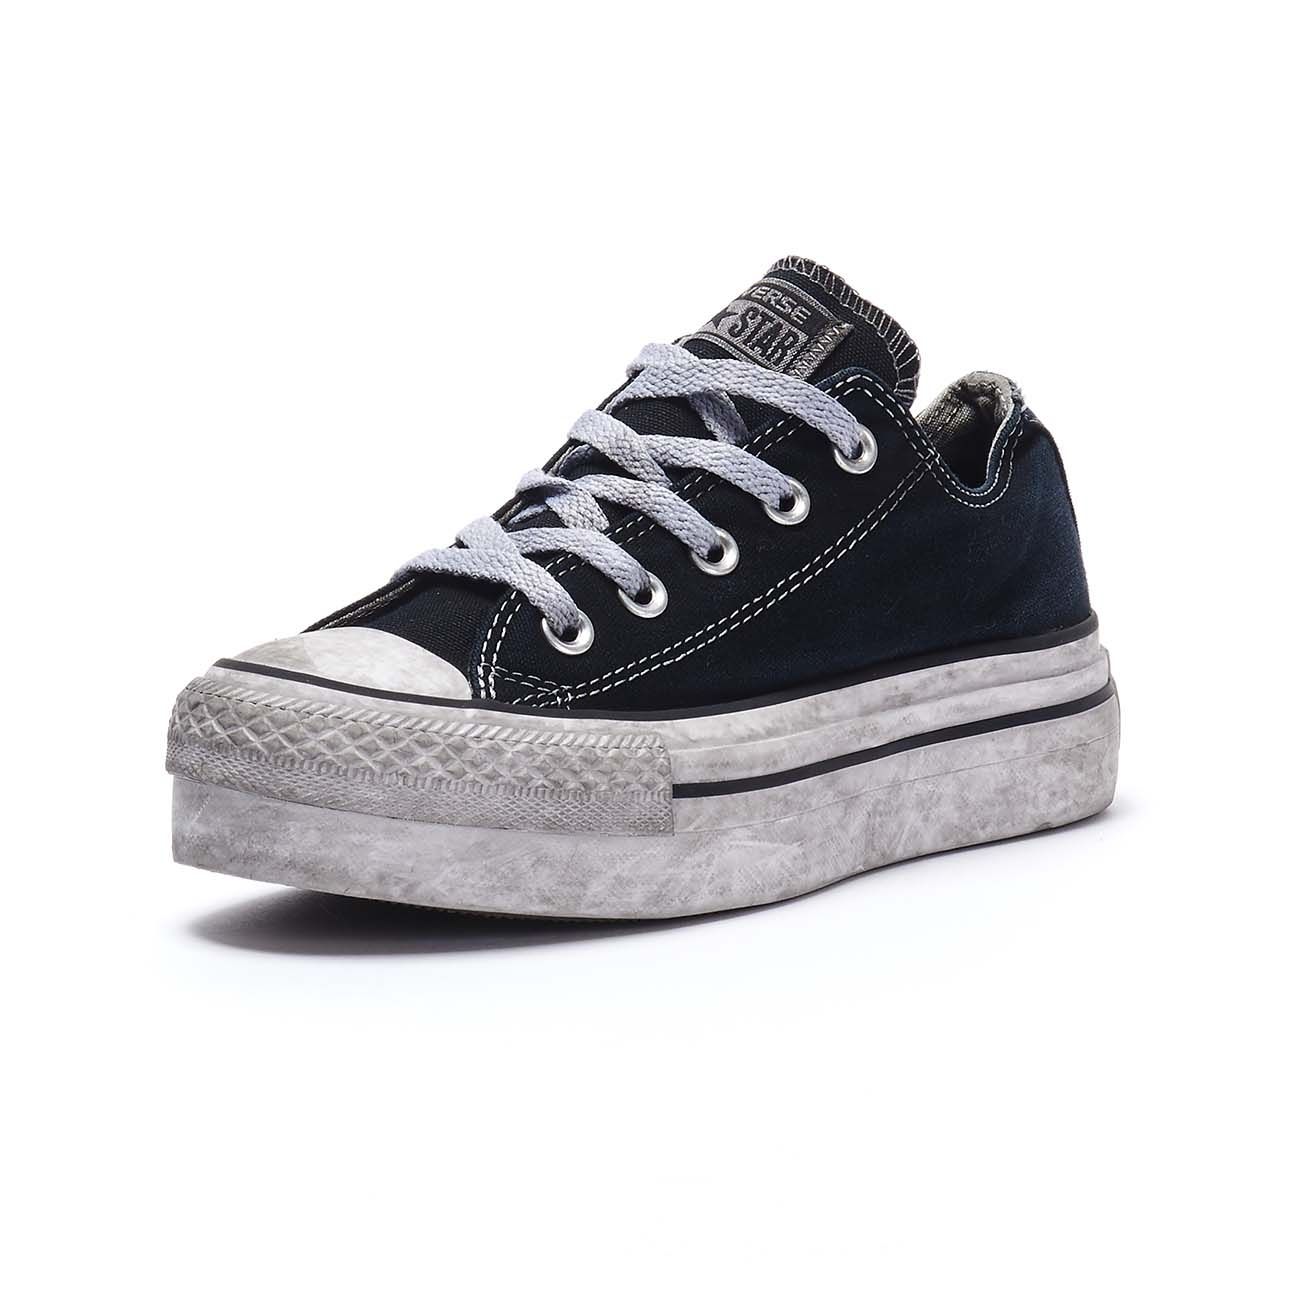 ALL STAR AS OX PLATFORM CANVAS SNEAKERS Woman Black smoke in Converse توشيبا غسالة اتوماتيك